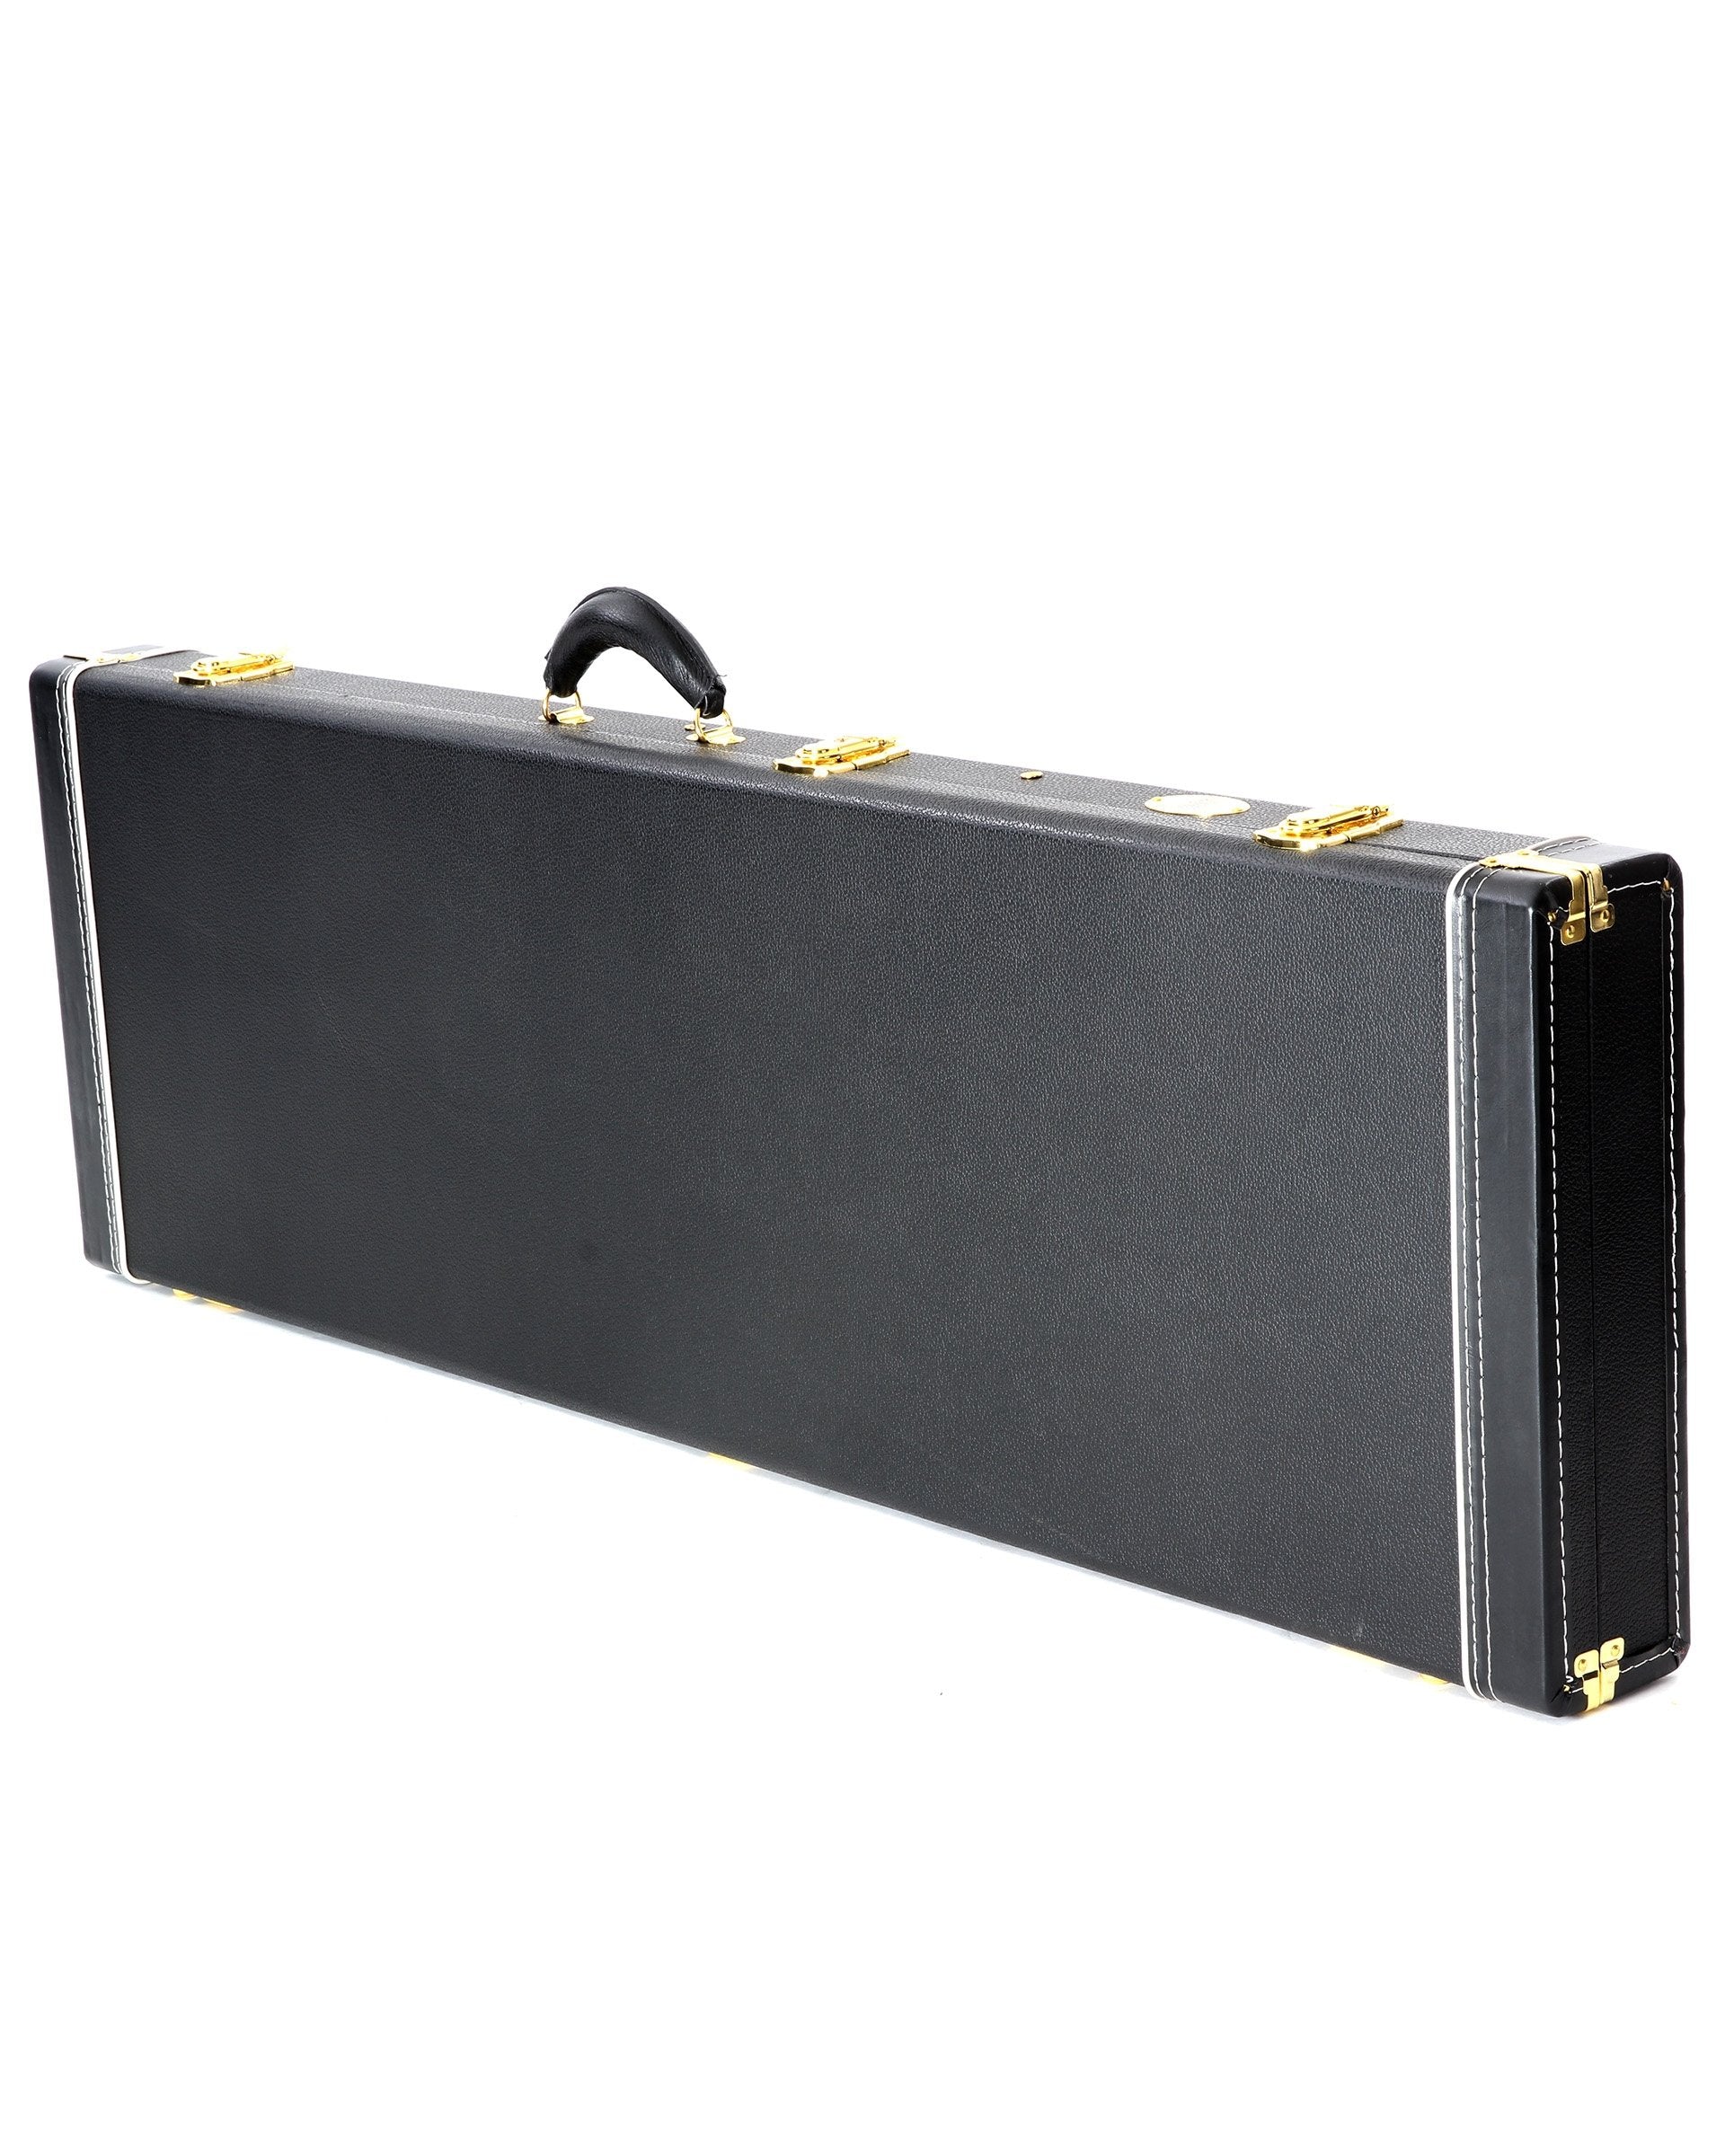 Image 1 of Guardian Vintage "Bass" Guitar Case - SKU# GVGC-FBS : Product Type Accessories & Parts : Elderly Instruments